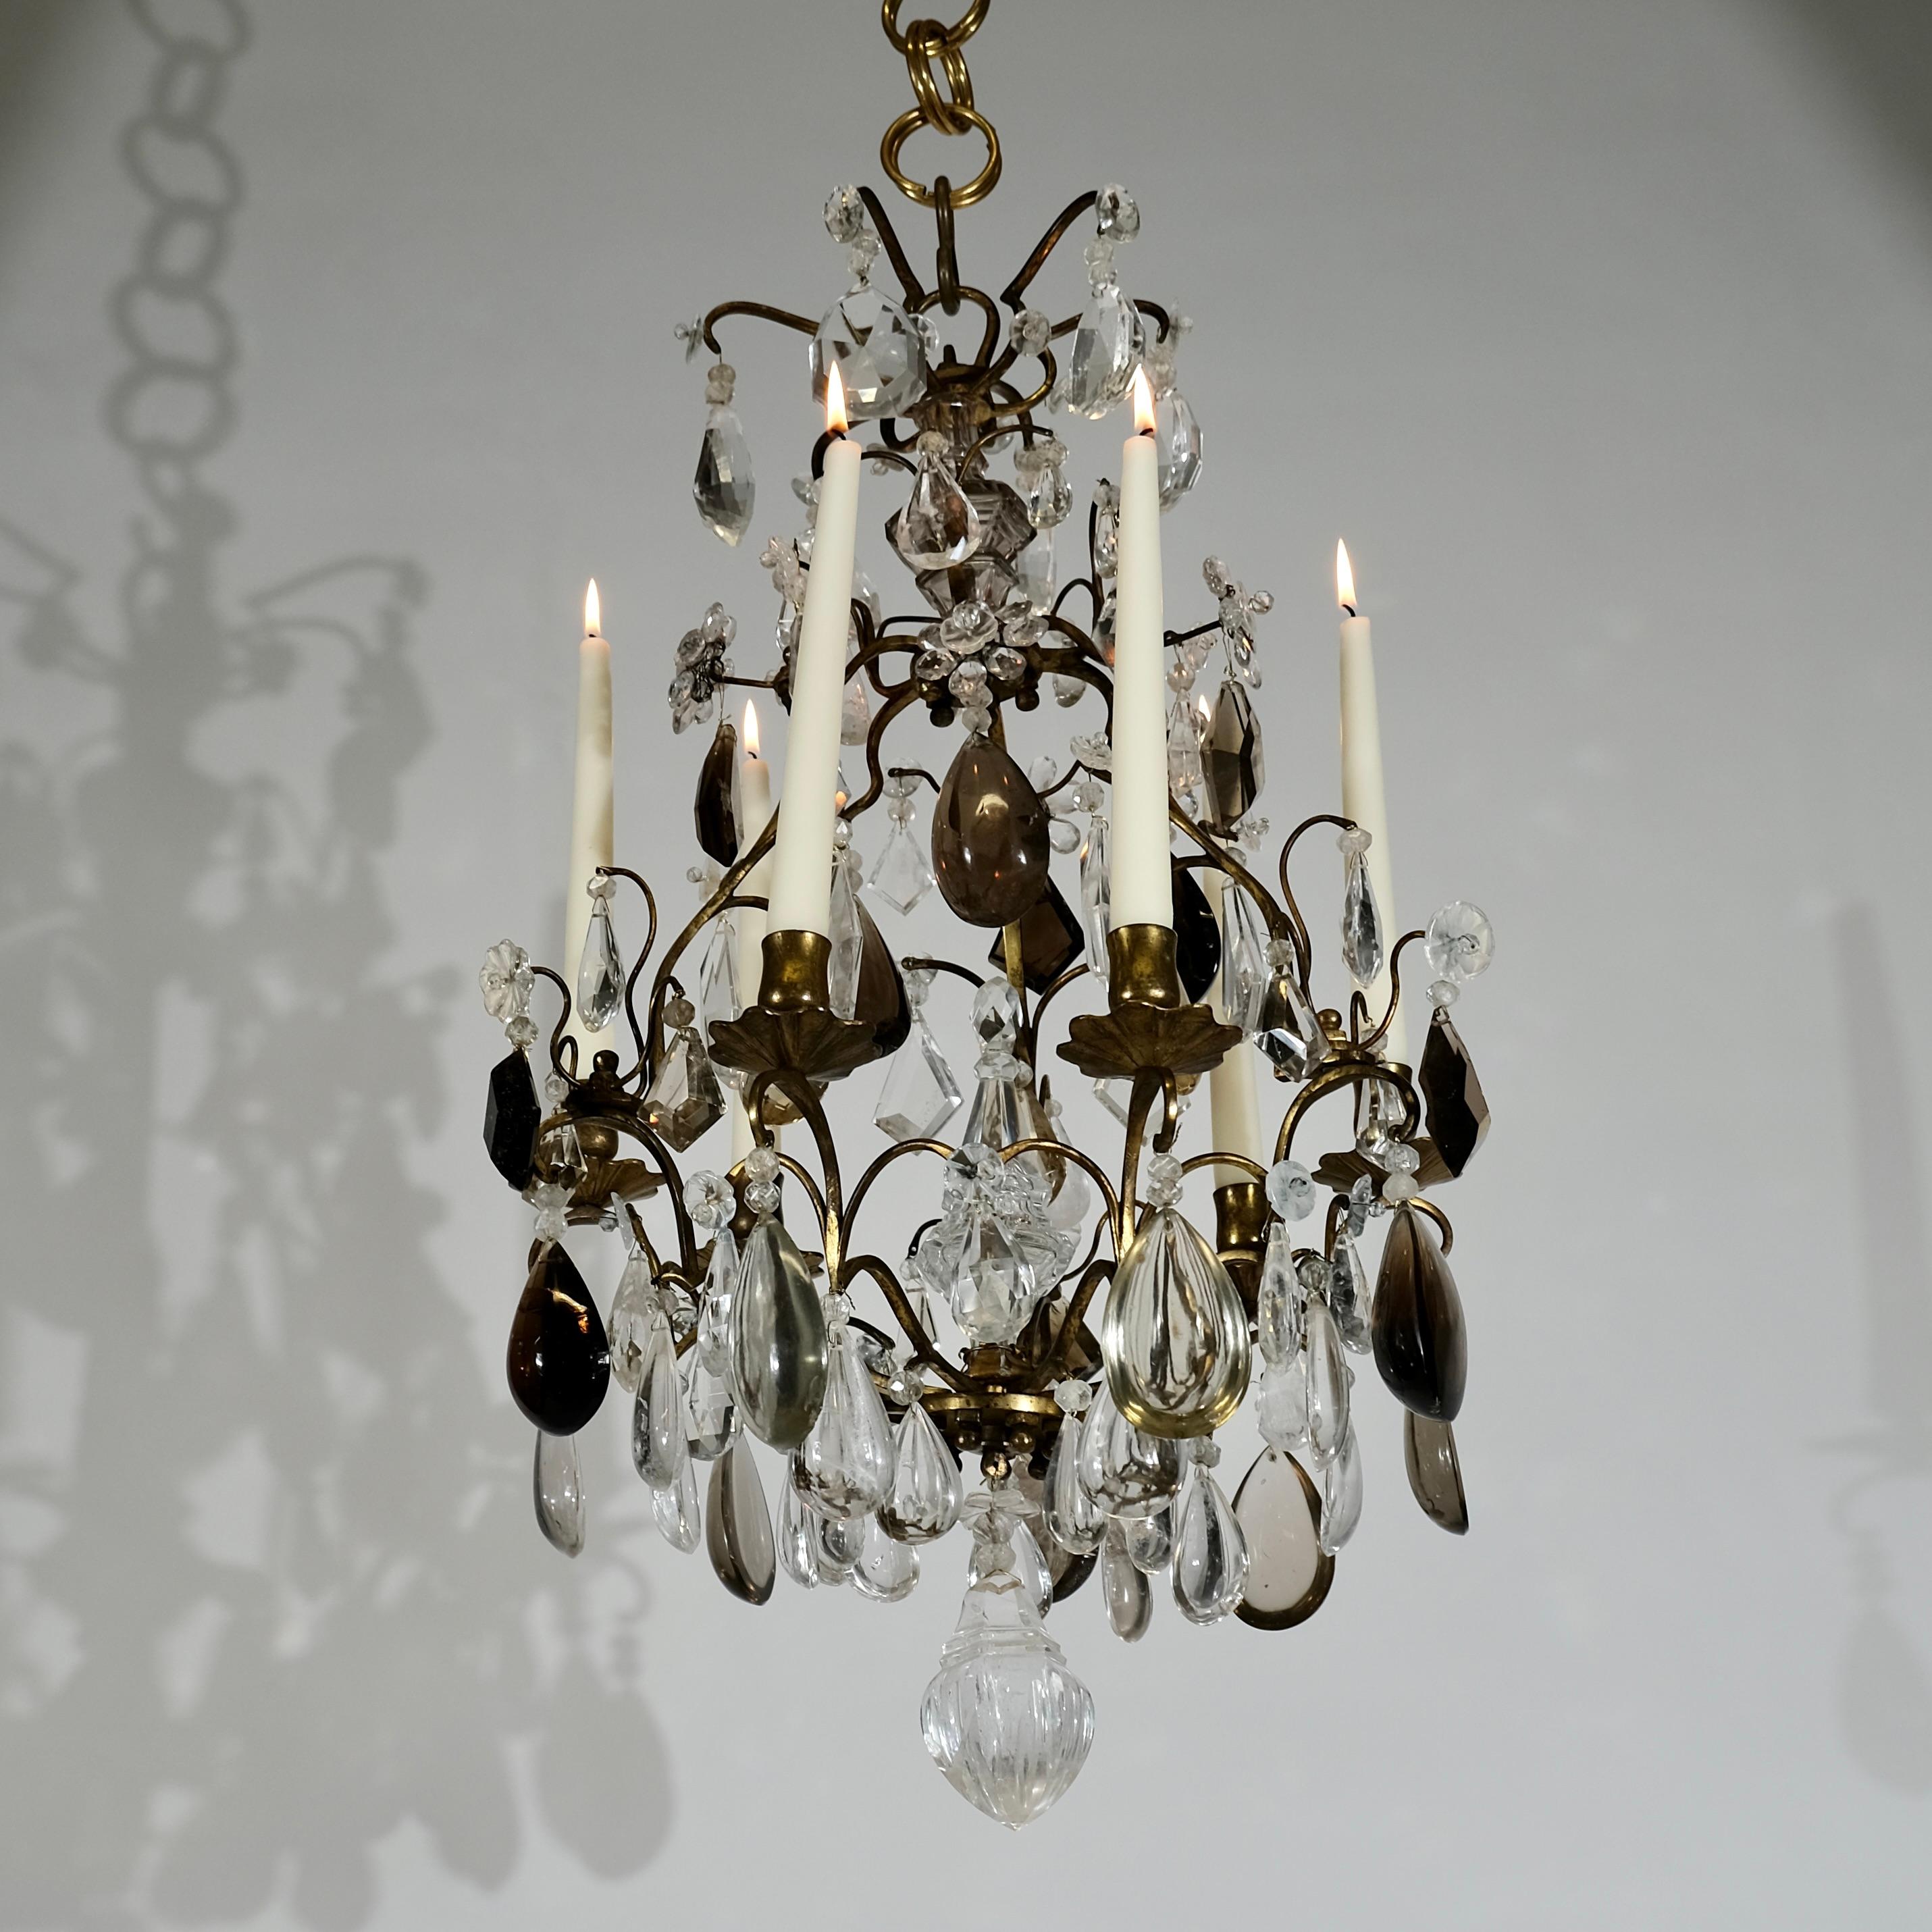 Small Baroque Style Chandelier with Exquisite Rock Crystals. 19th c. 4